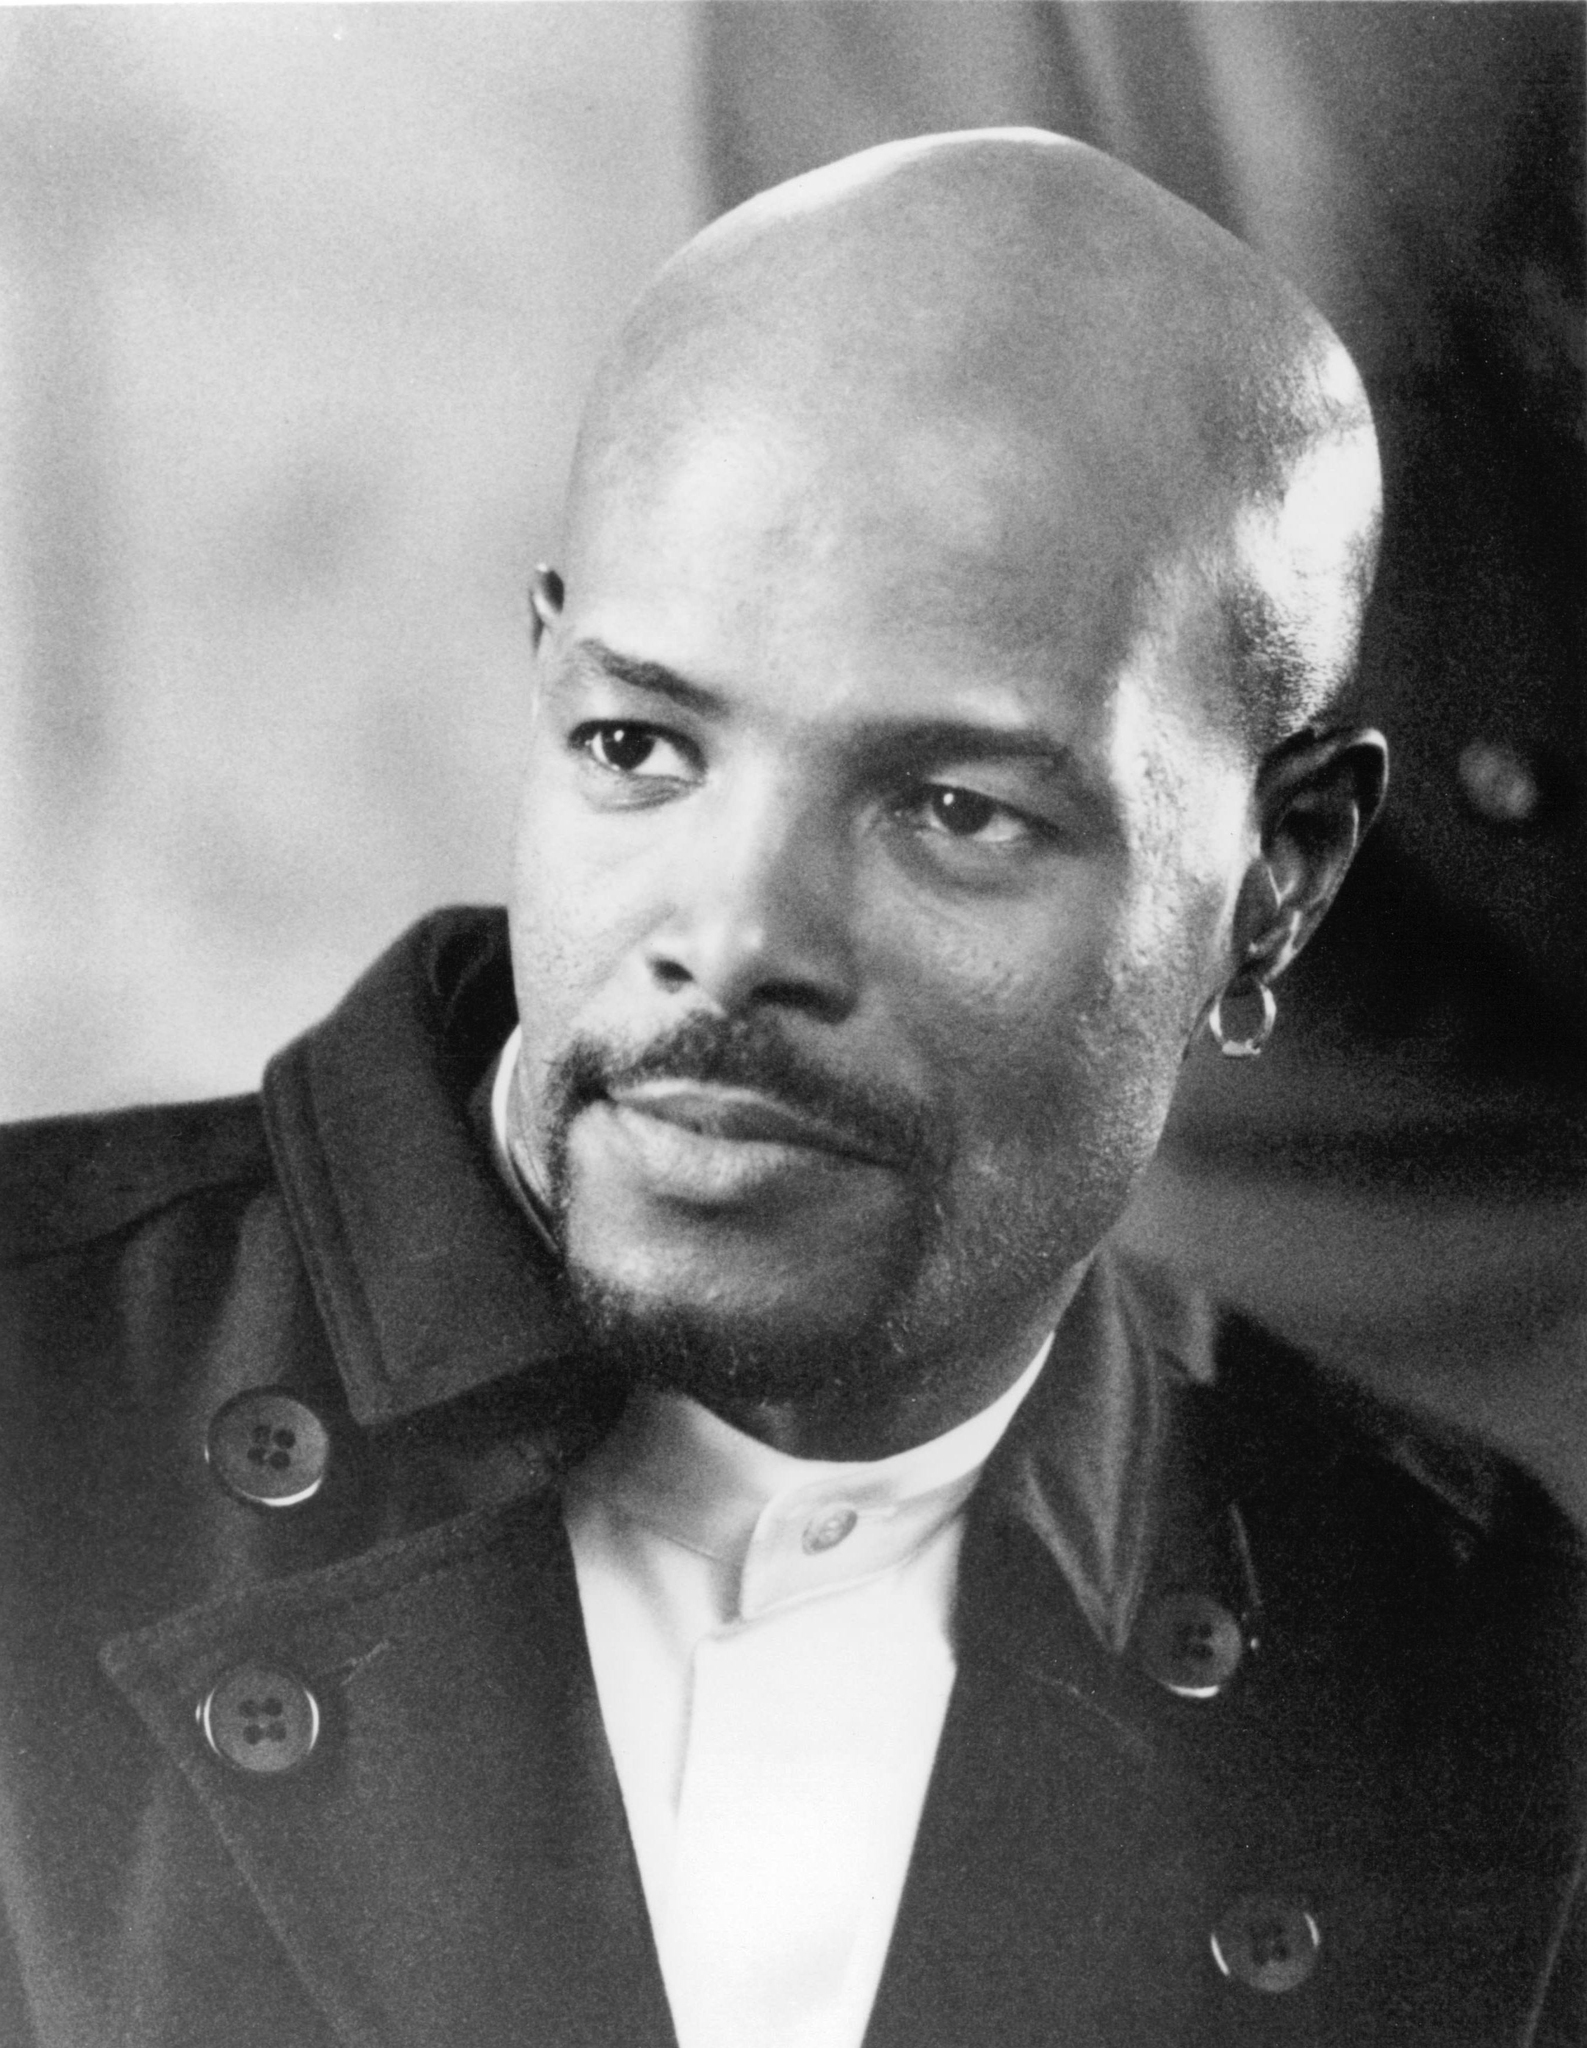 Still of Keenen Ivory Wayans in A Low Down Dirty Shame (1994)